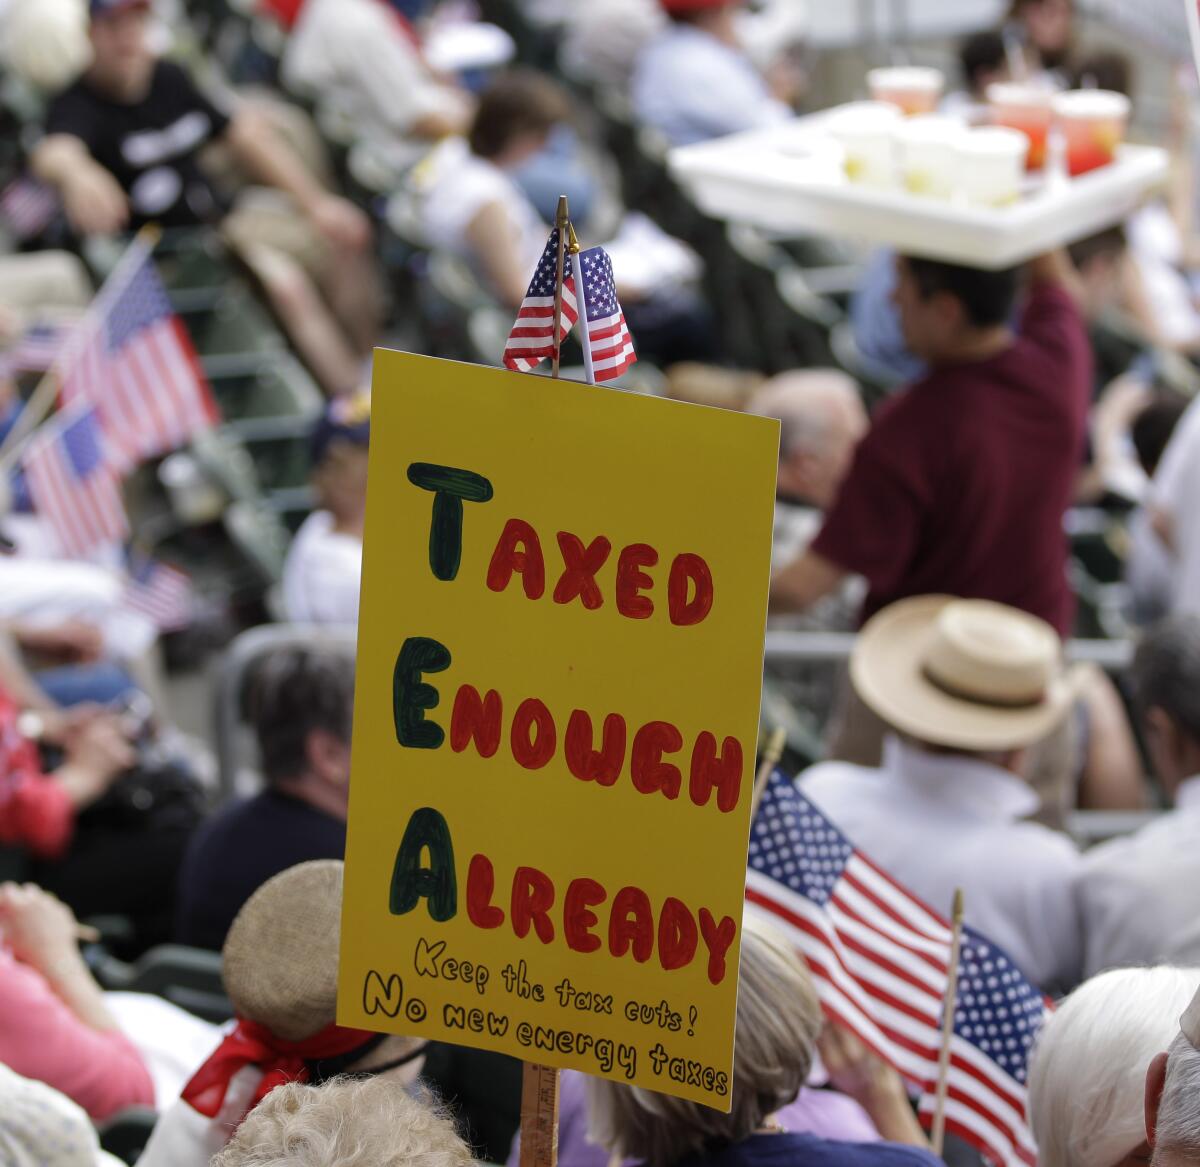 Activist in a crowd with a sign that says "taxed enough already"